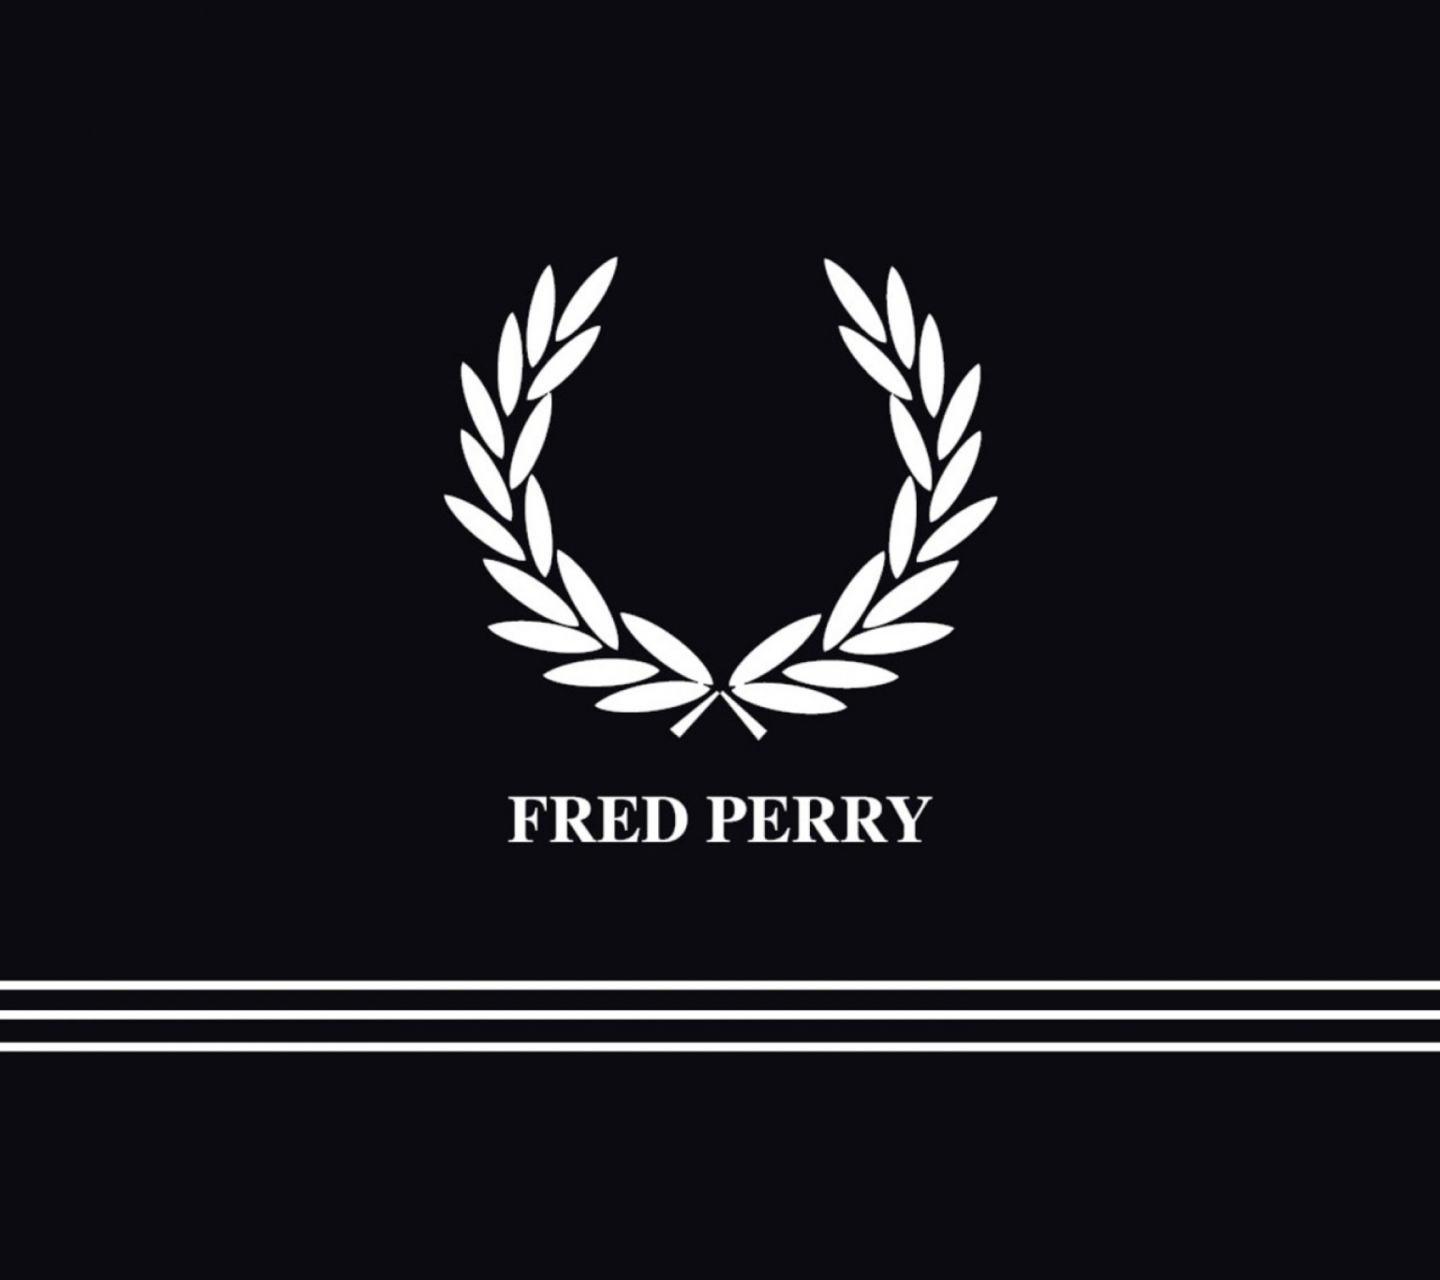 Fred Perry wallpaper 1440x1280